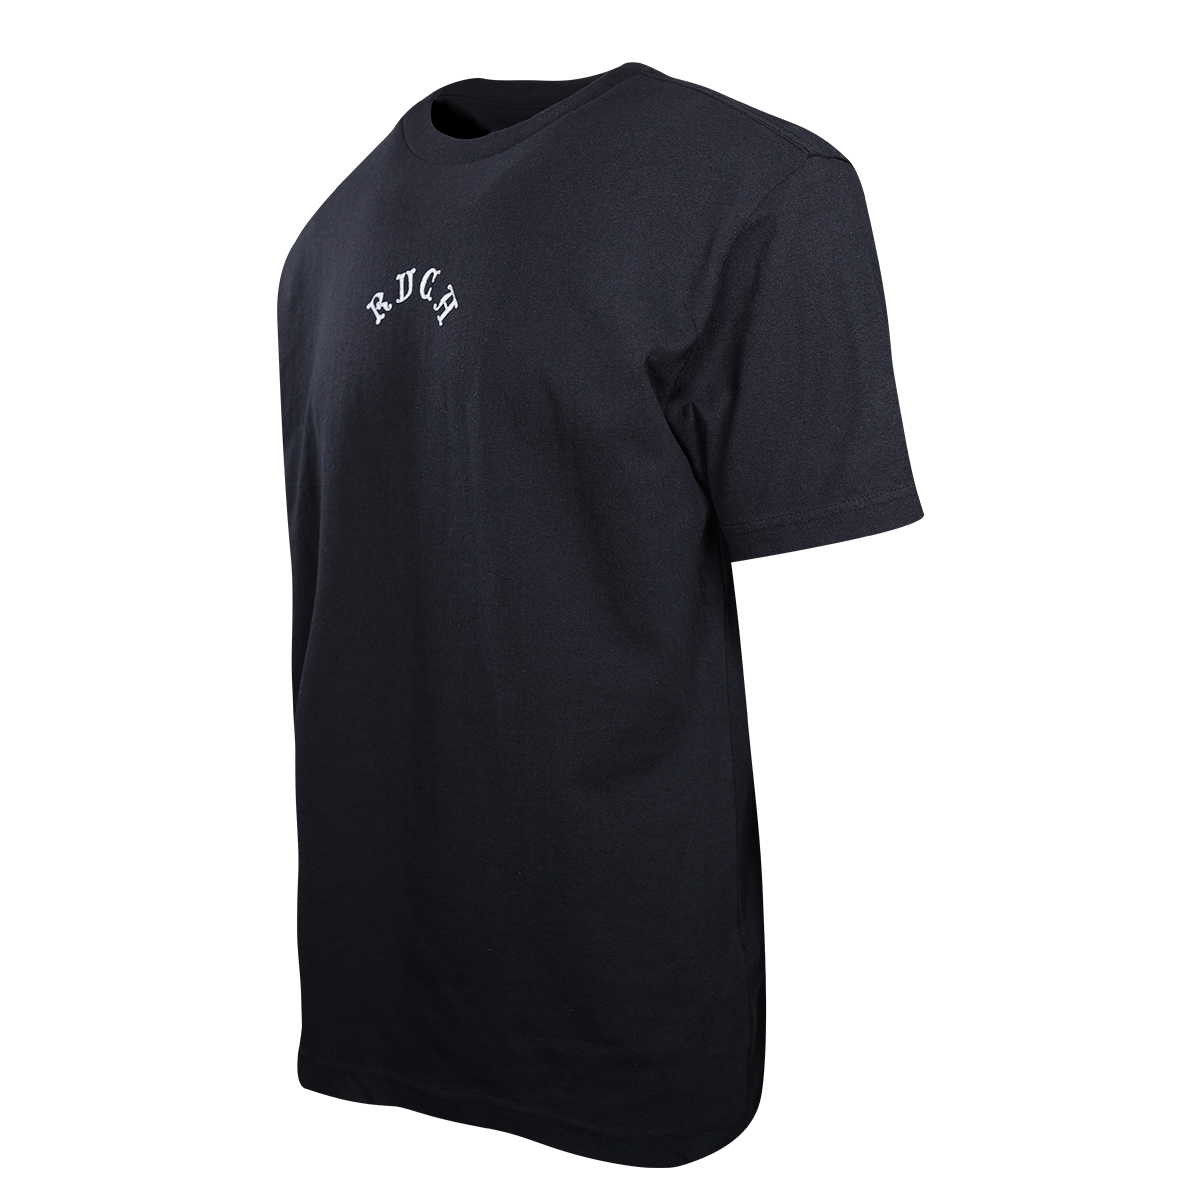 RVCA Men's Black The Monkey Relaxed Fit S/S T-Shirt (S13)